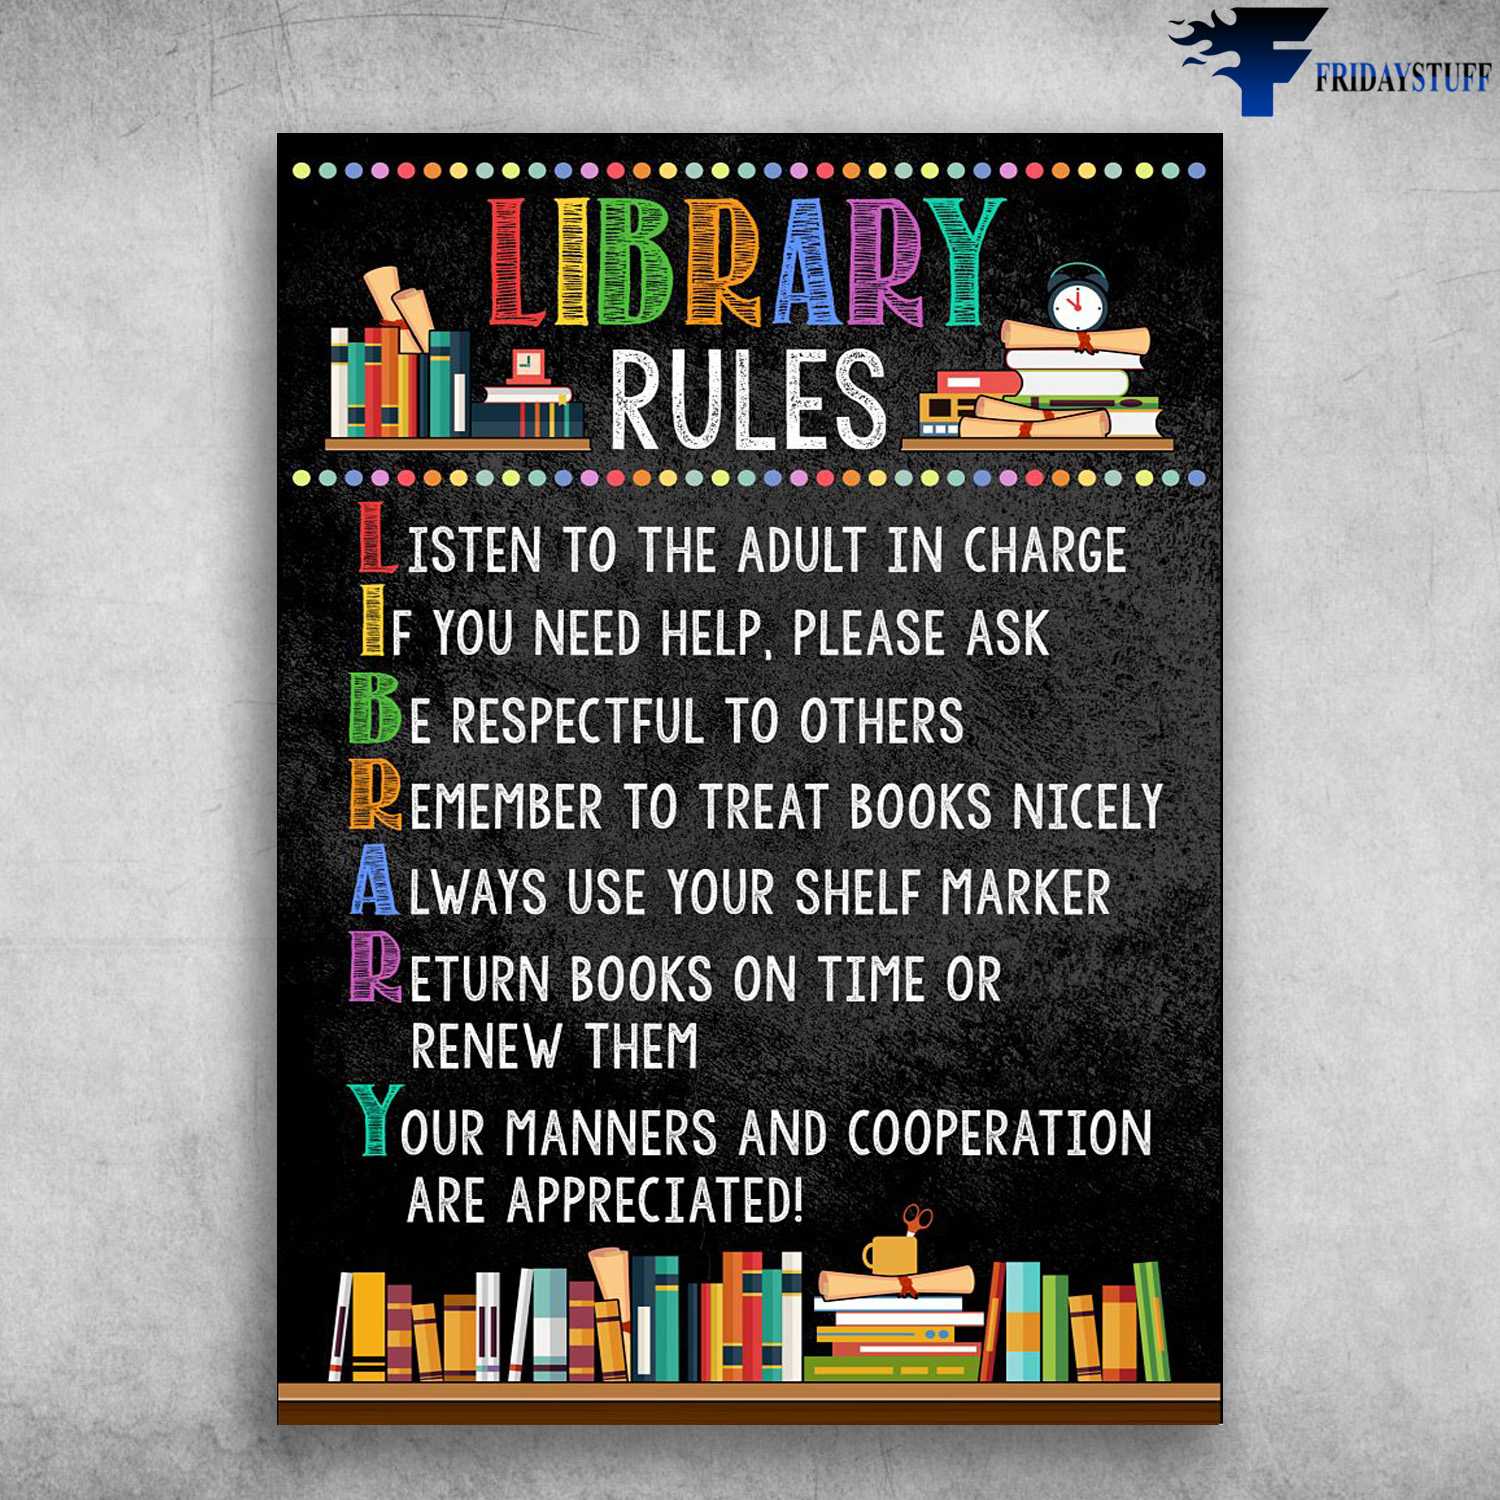 Free Library Rules Poster